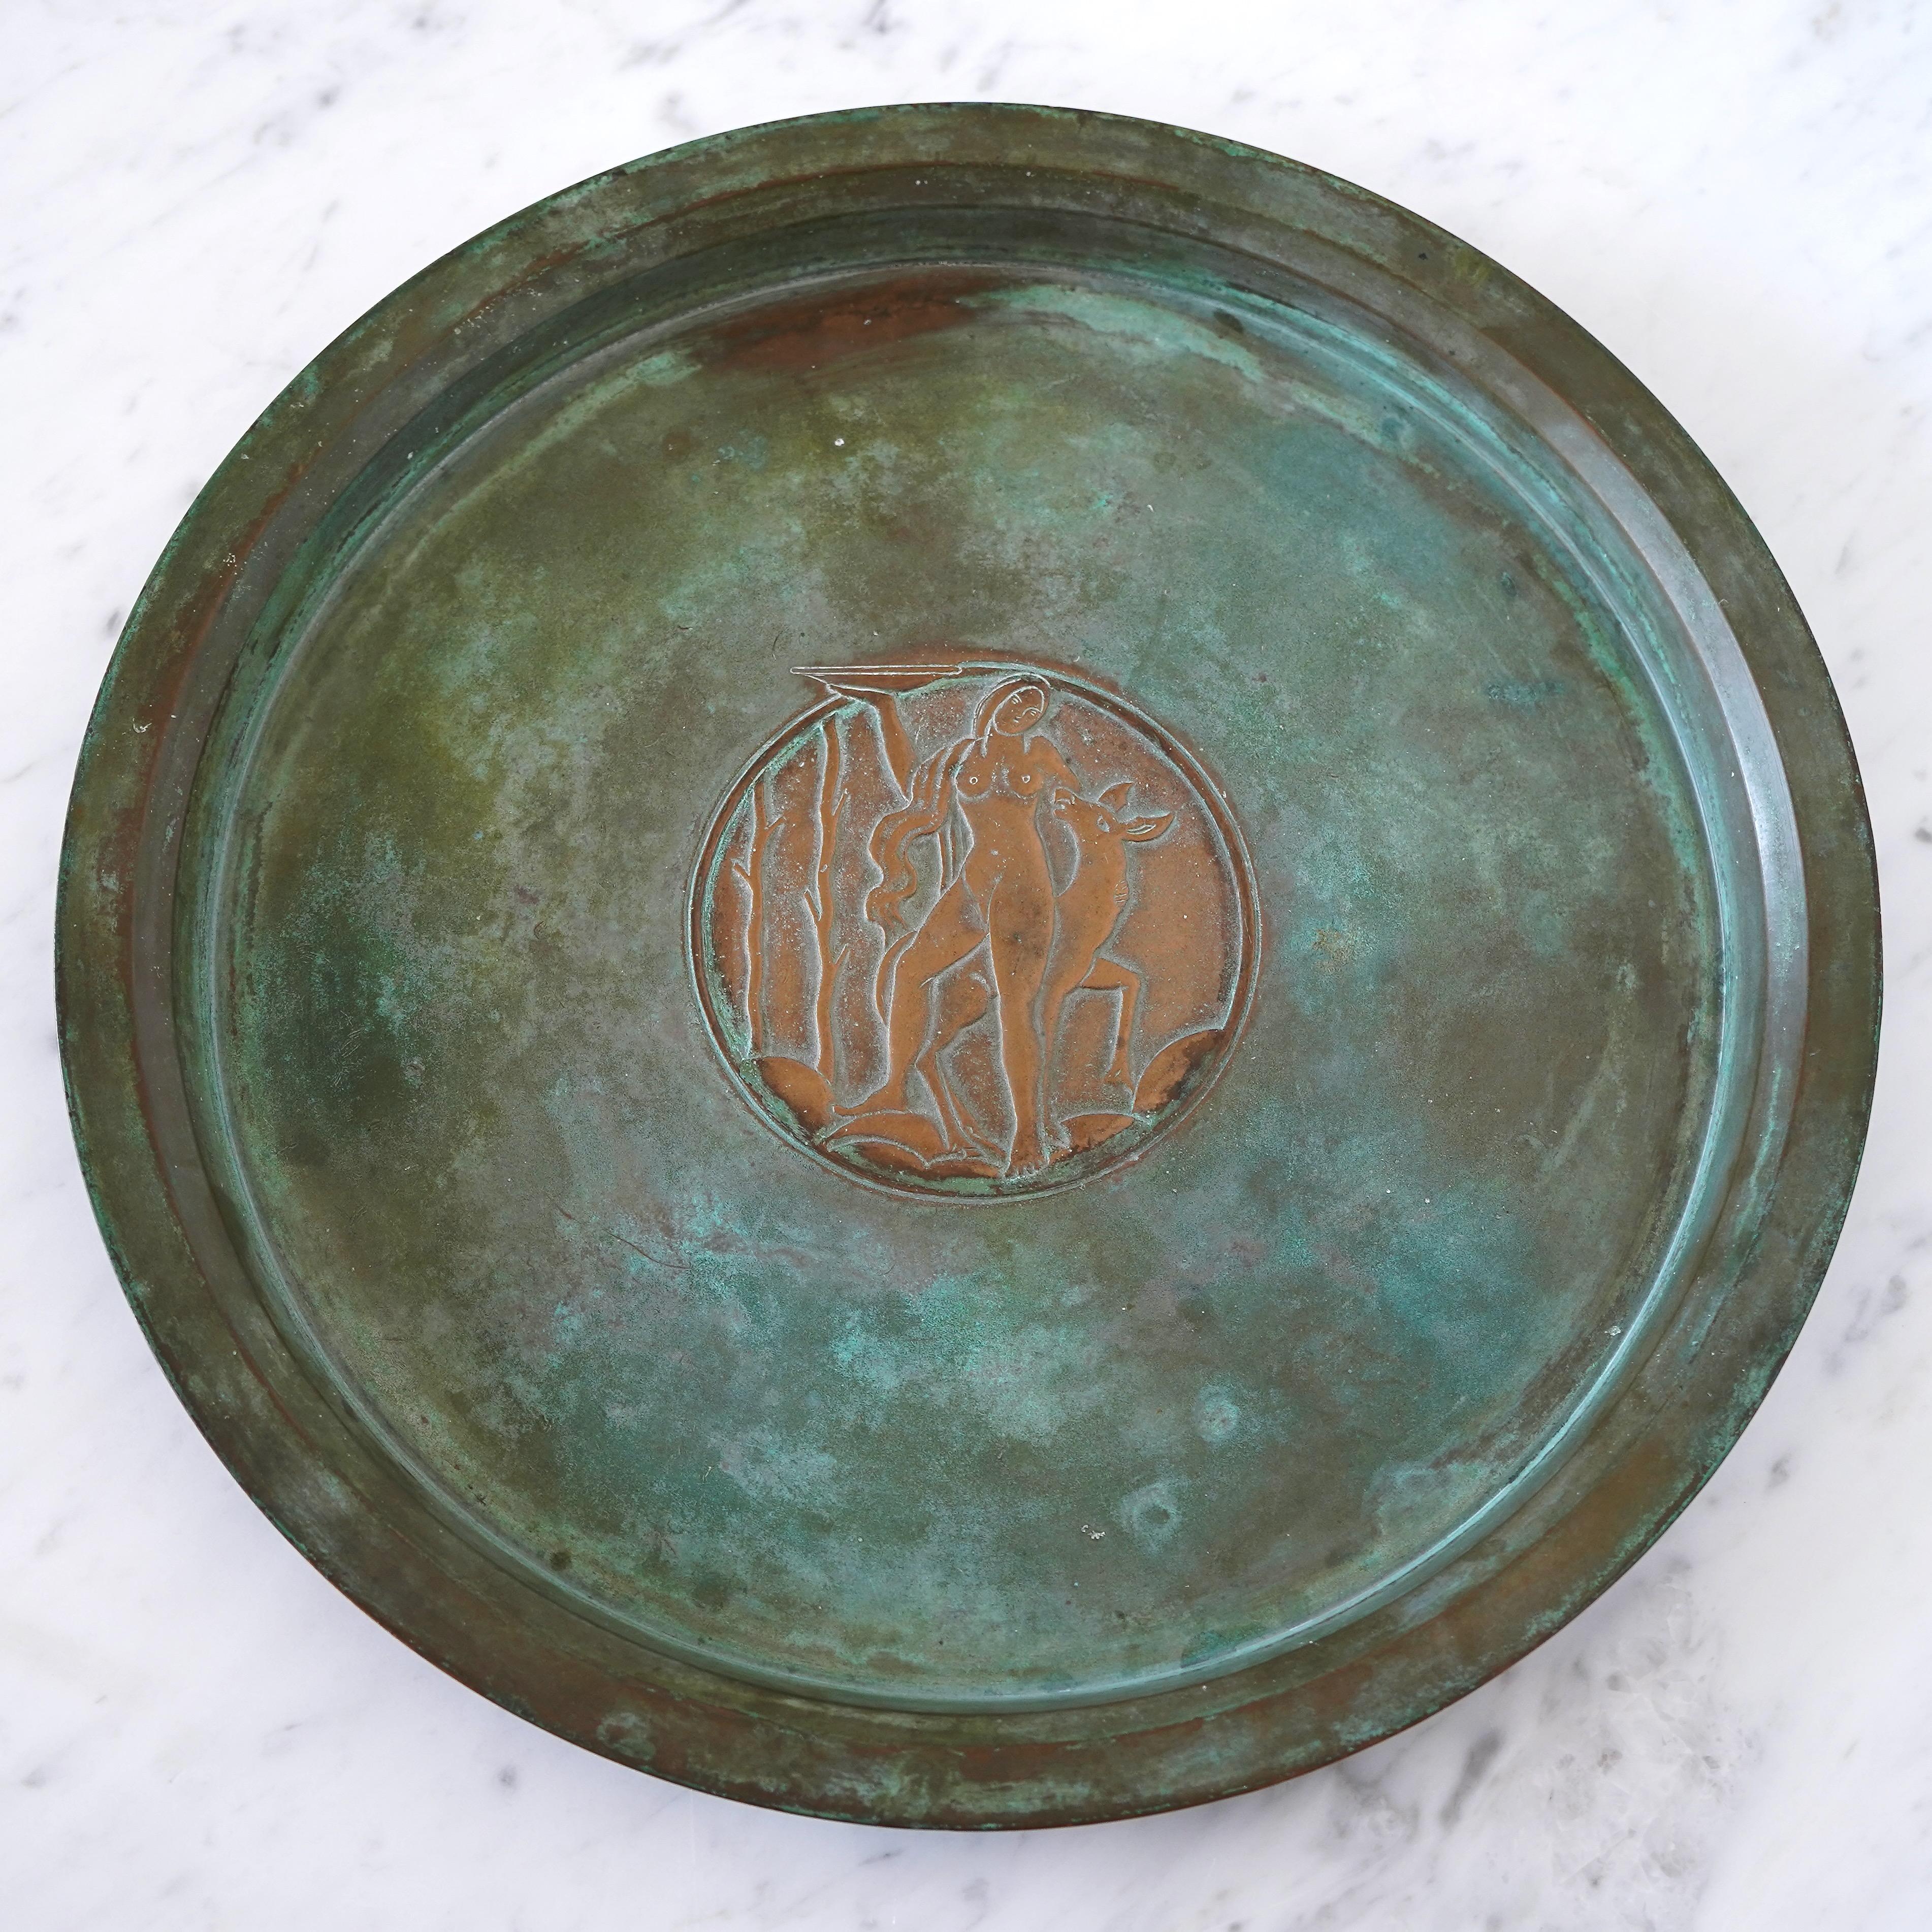 A large and beautiful bronze dish with amazing patina. Decor of goddess Diana with a dear. Art deco / Swedish Grace. Designed by Sune Bäckström in Malmoe, Sweden, 1920s.  

Great condition. 
Stamped 'BRONS'.

Produced by Einar Bäckström